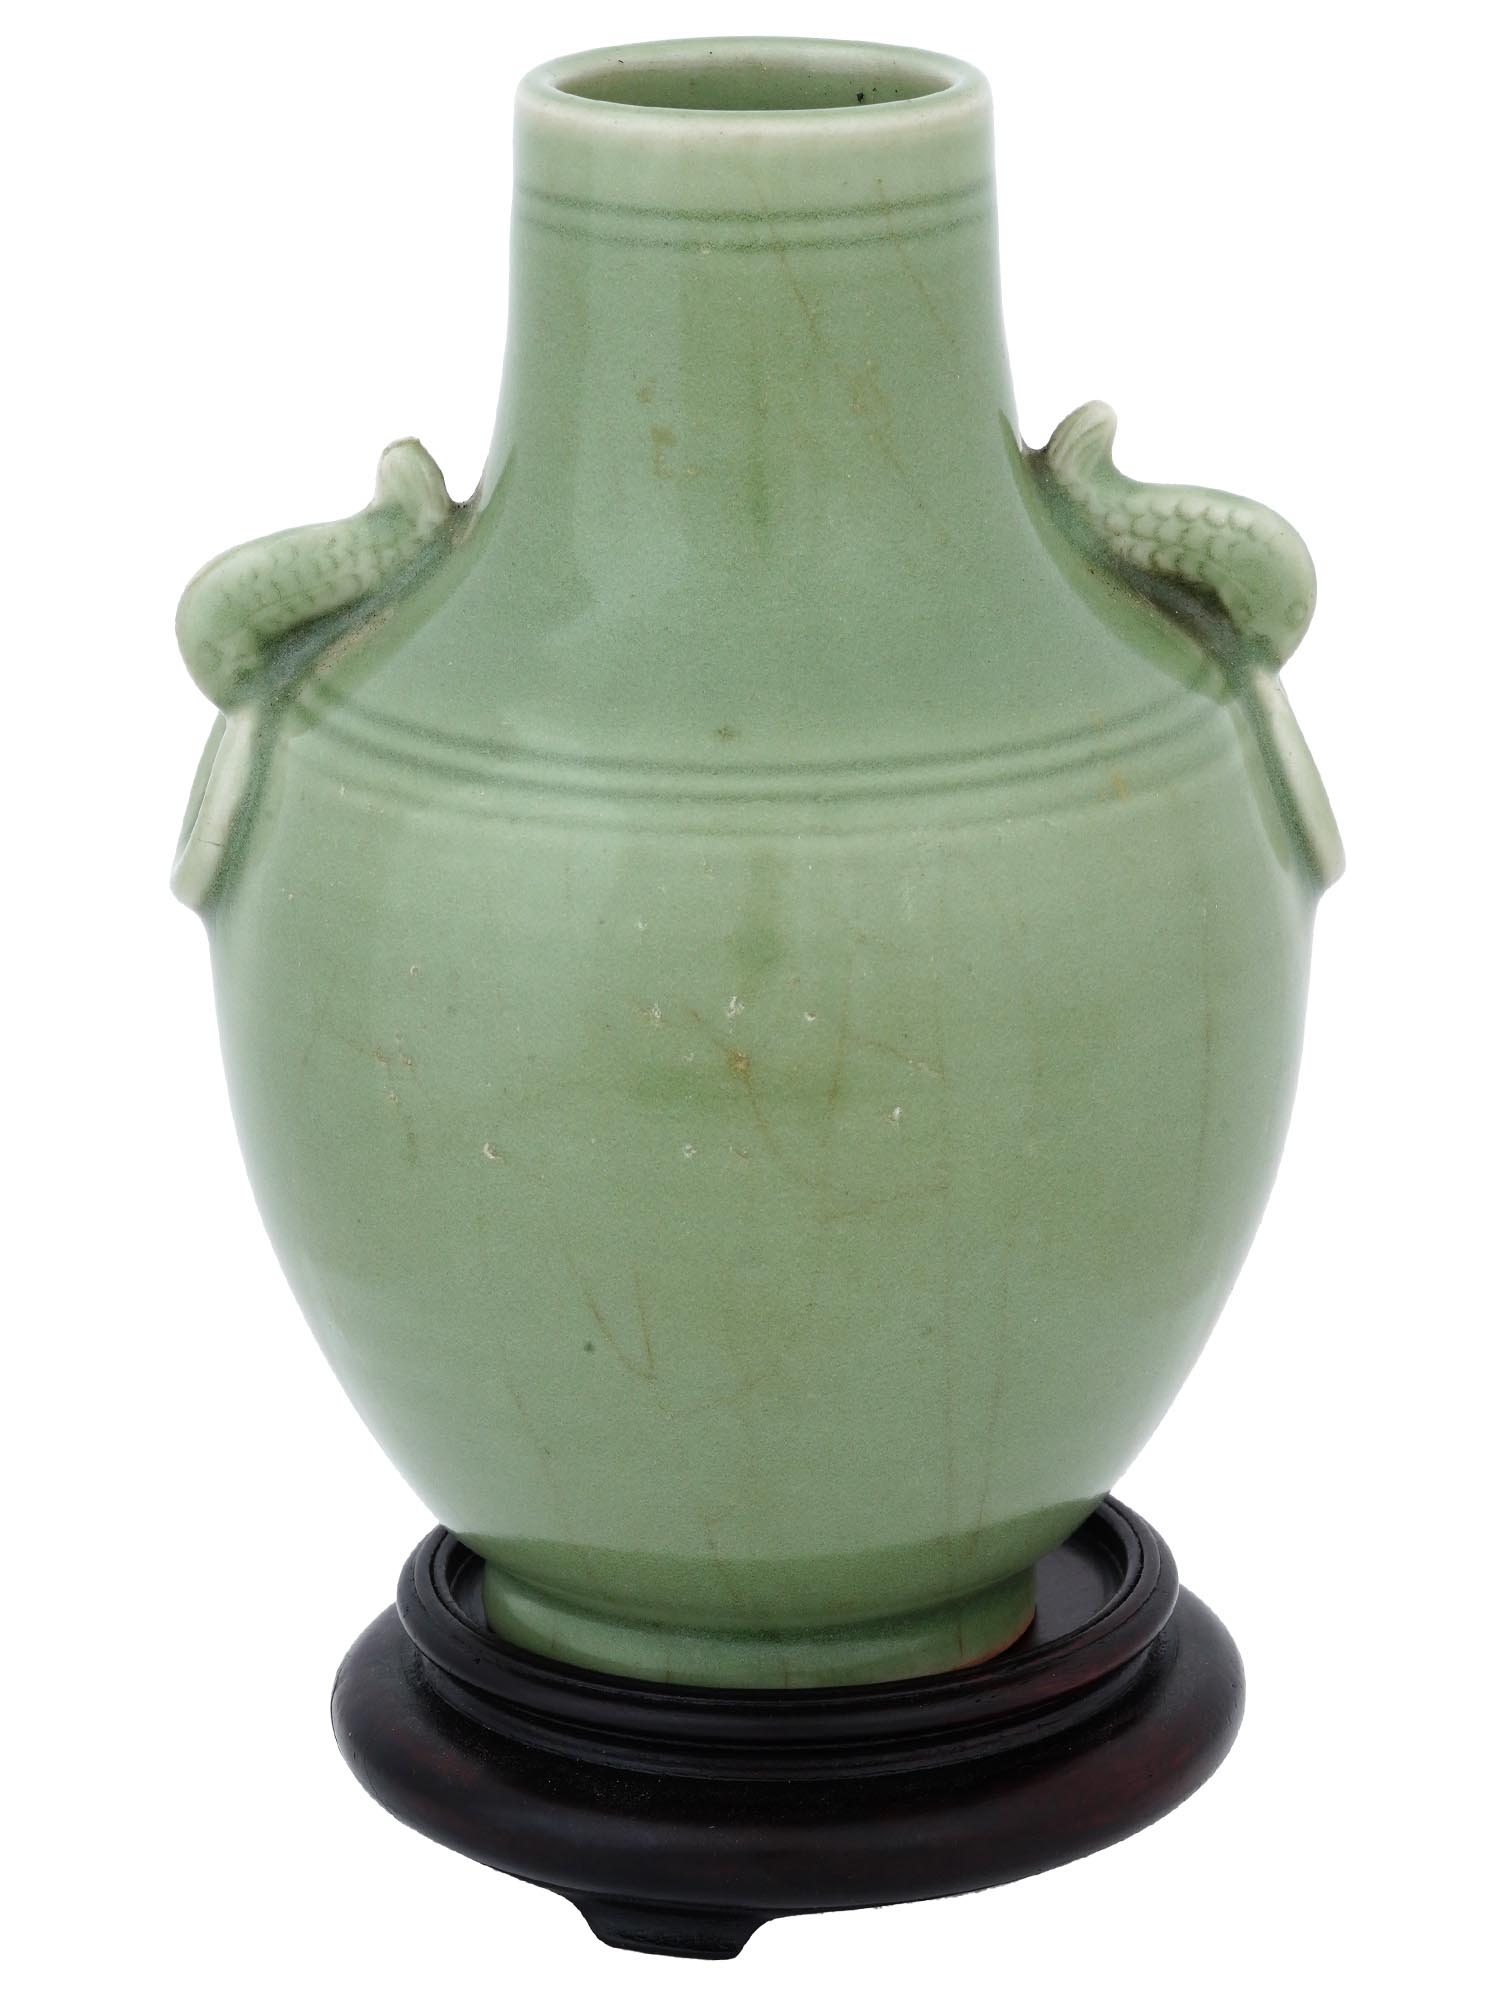 ANTIQUE CHINESE QING DYNASTY CELADON BALUSTER VASE PIC-0